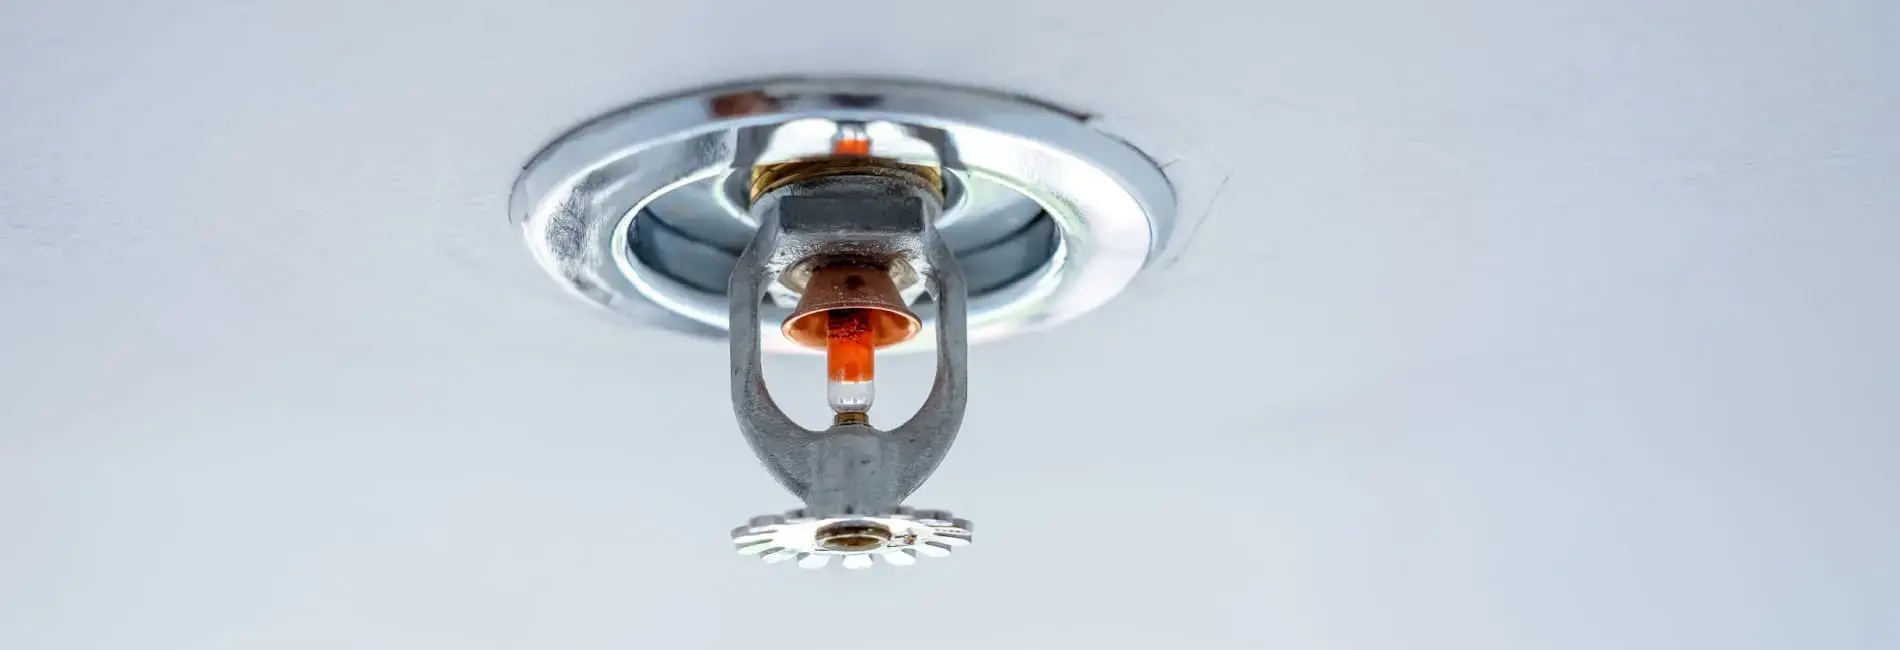 5 Ways to Protect IT Equipment from Sprinkler Damage